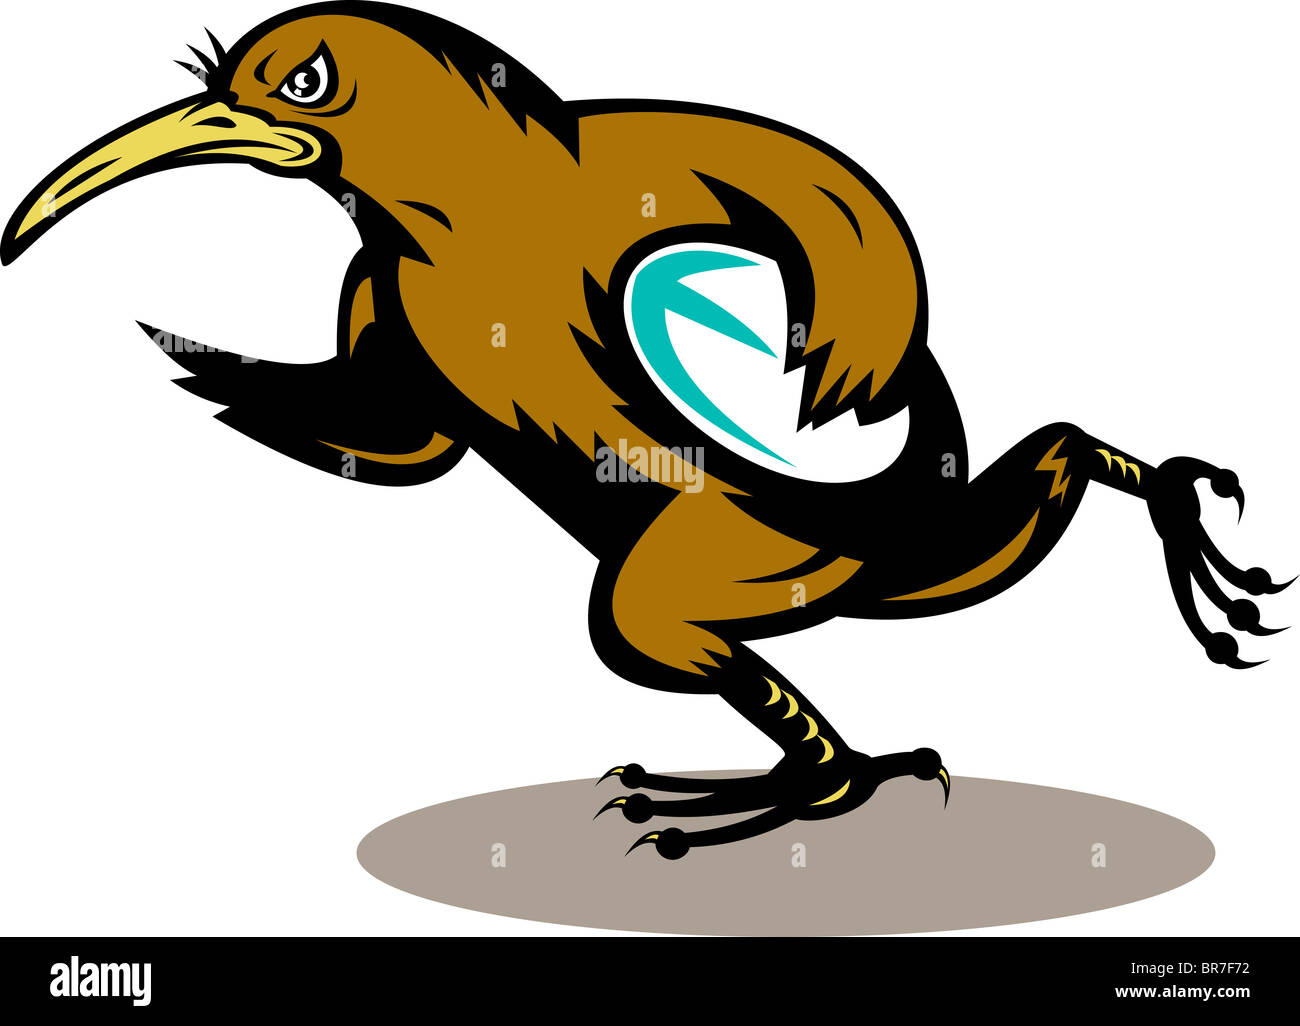 illustration of a cartoon Kiwi rugby player running with ball isolated on white Stock Photo